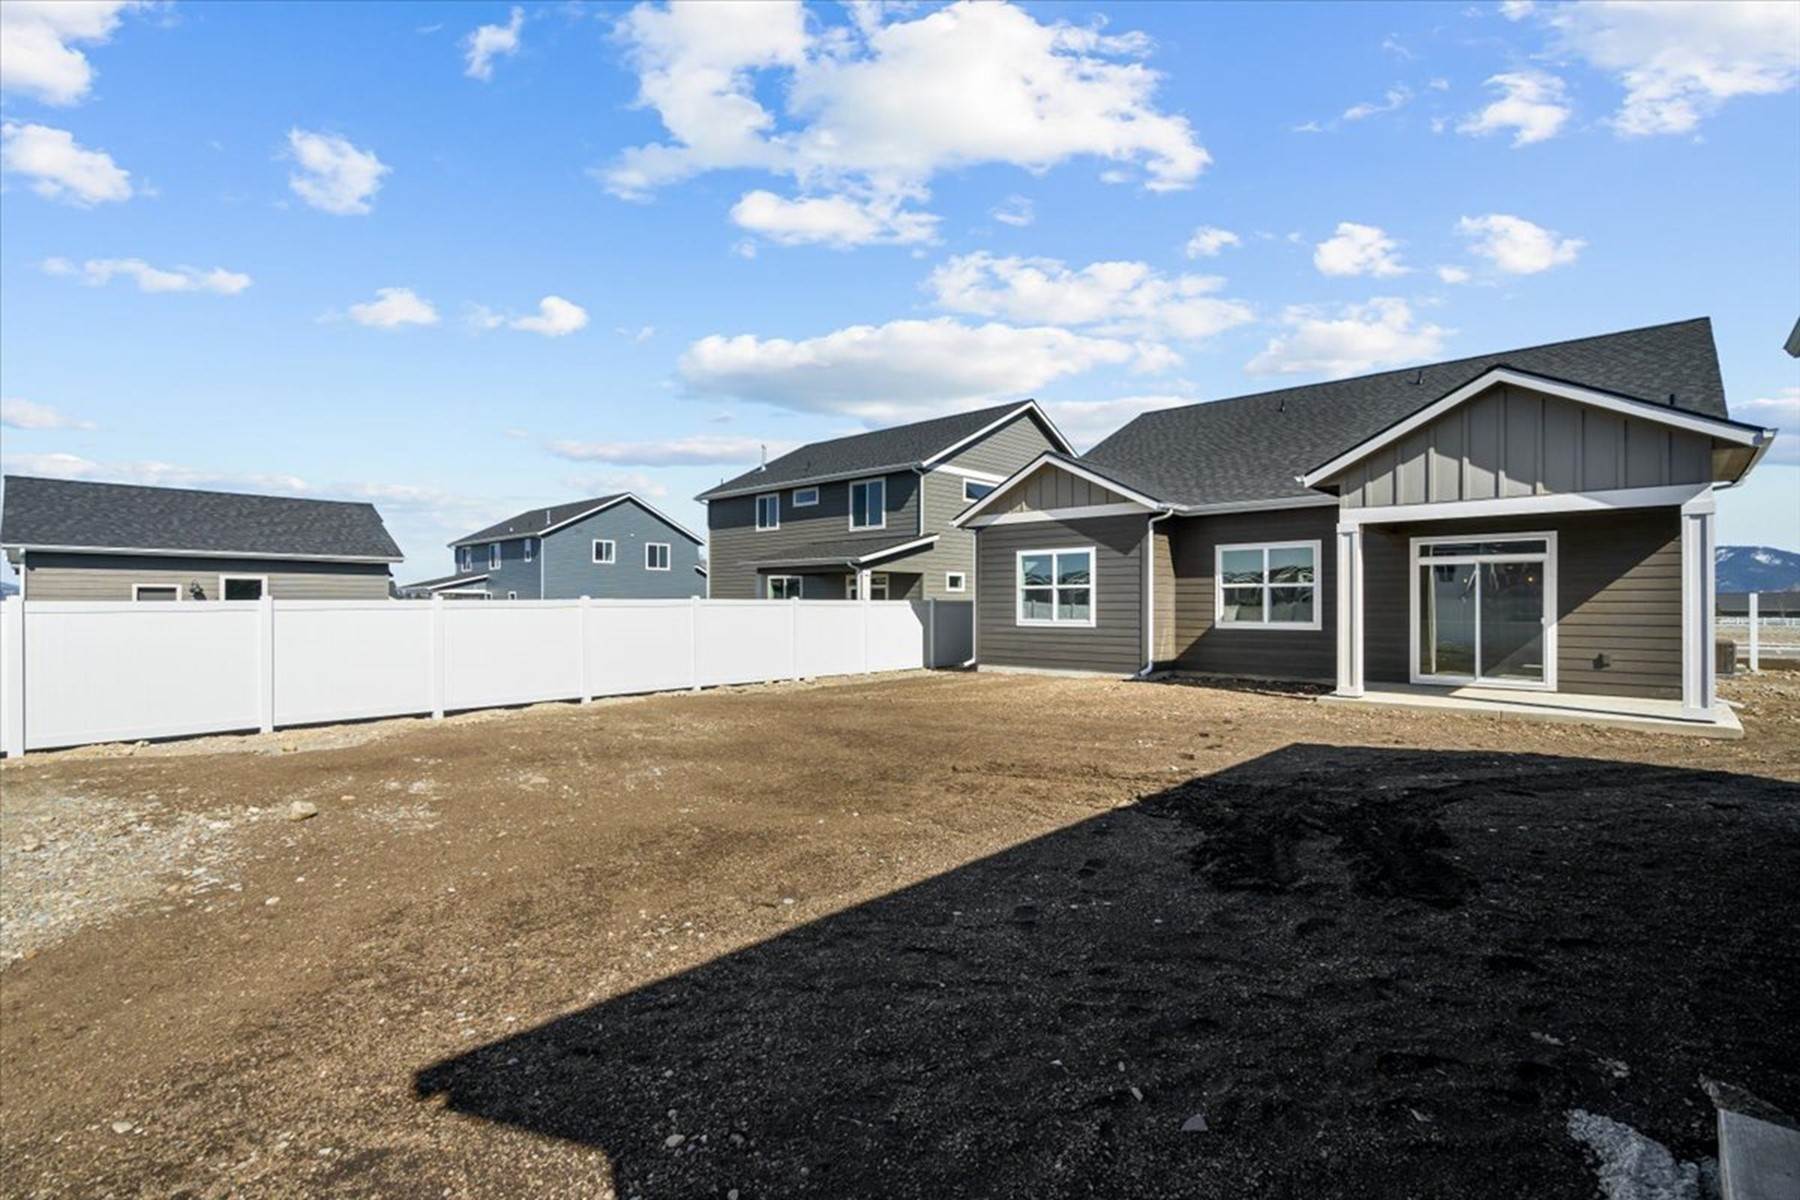 28. Single Family Homes for Sale at The Bridger w/Detached Garage 3129 Cassiopeia Post Falls, Idaho 83854 United States